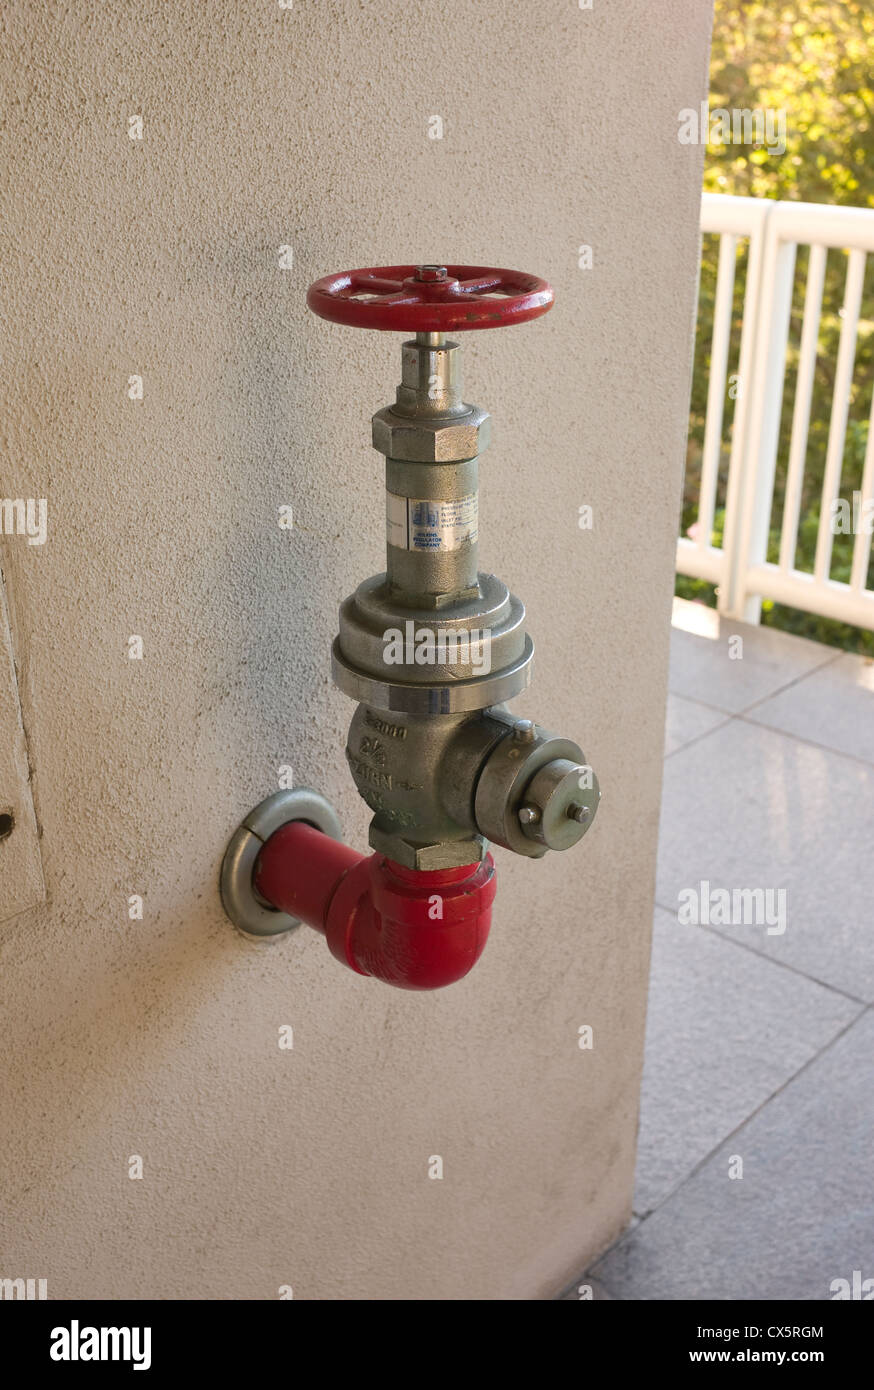 Valve/water hydrant at Two California Plaza, Grand South Avenue, Bunker Hill District, Los Angeles, California Stock Photo